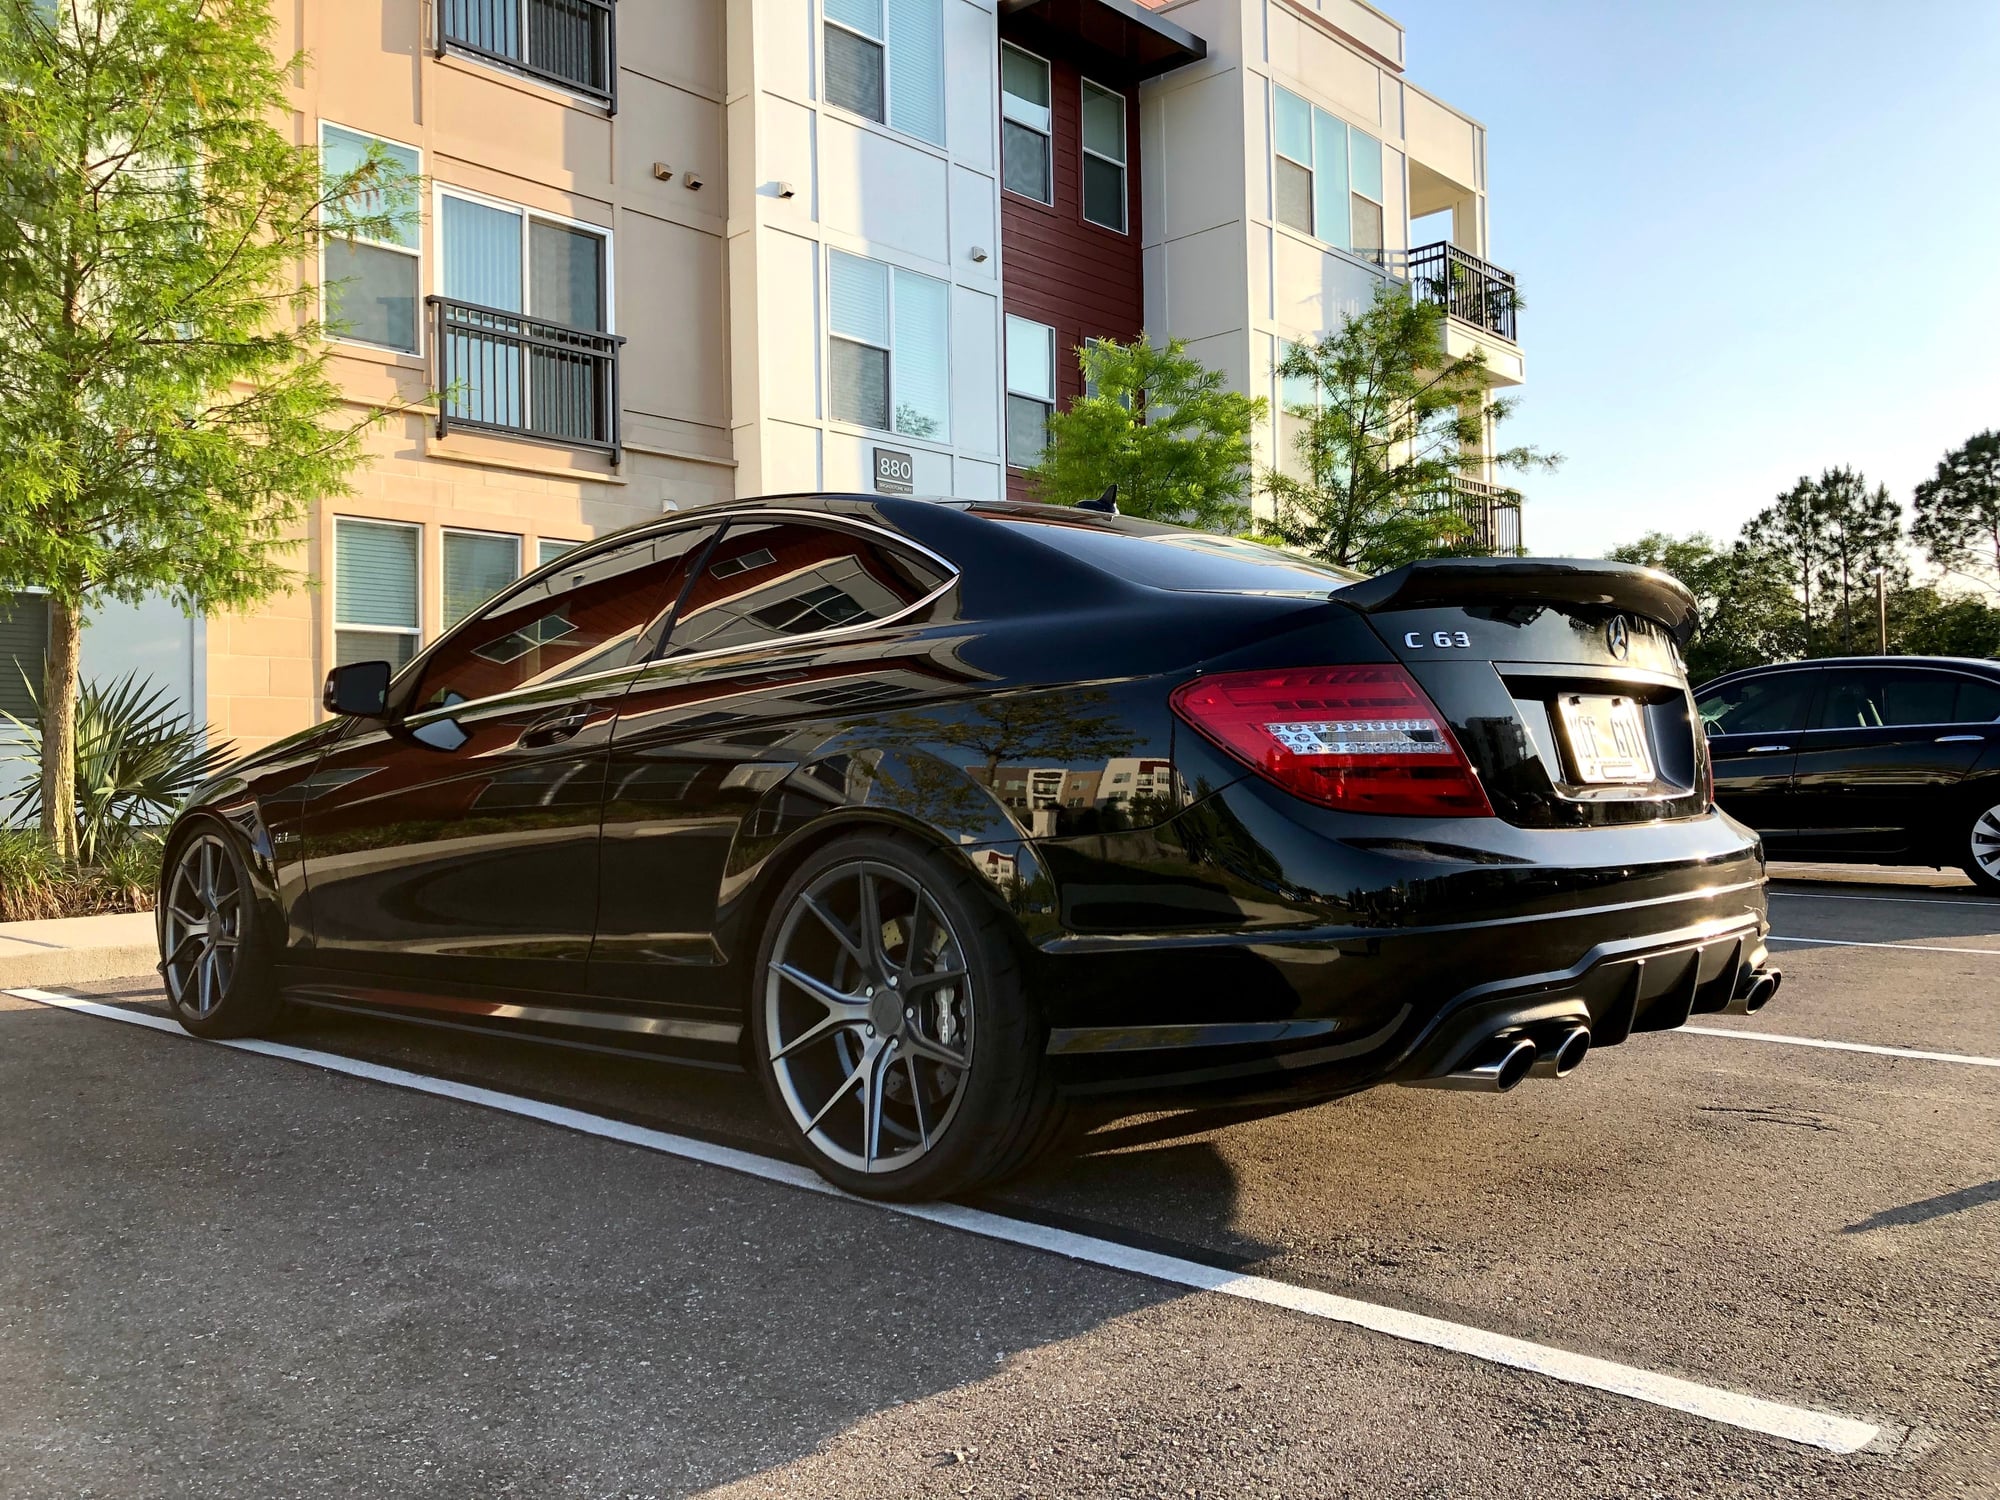 2012 Mercedes-Benz C63 AMG - 2012 C63 AMG Coupe - tastefully modified - Used - VIN WDDGJ7HB5CF797699 - 64,000 Miles - 8 cyl - 2WD - Automatic - Coupe - Black - Altamonte Springs, FL 32701, United States